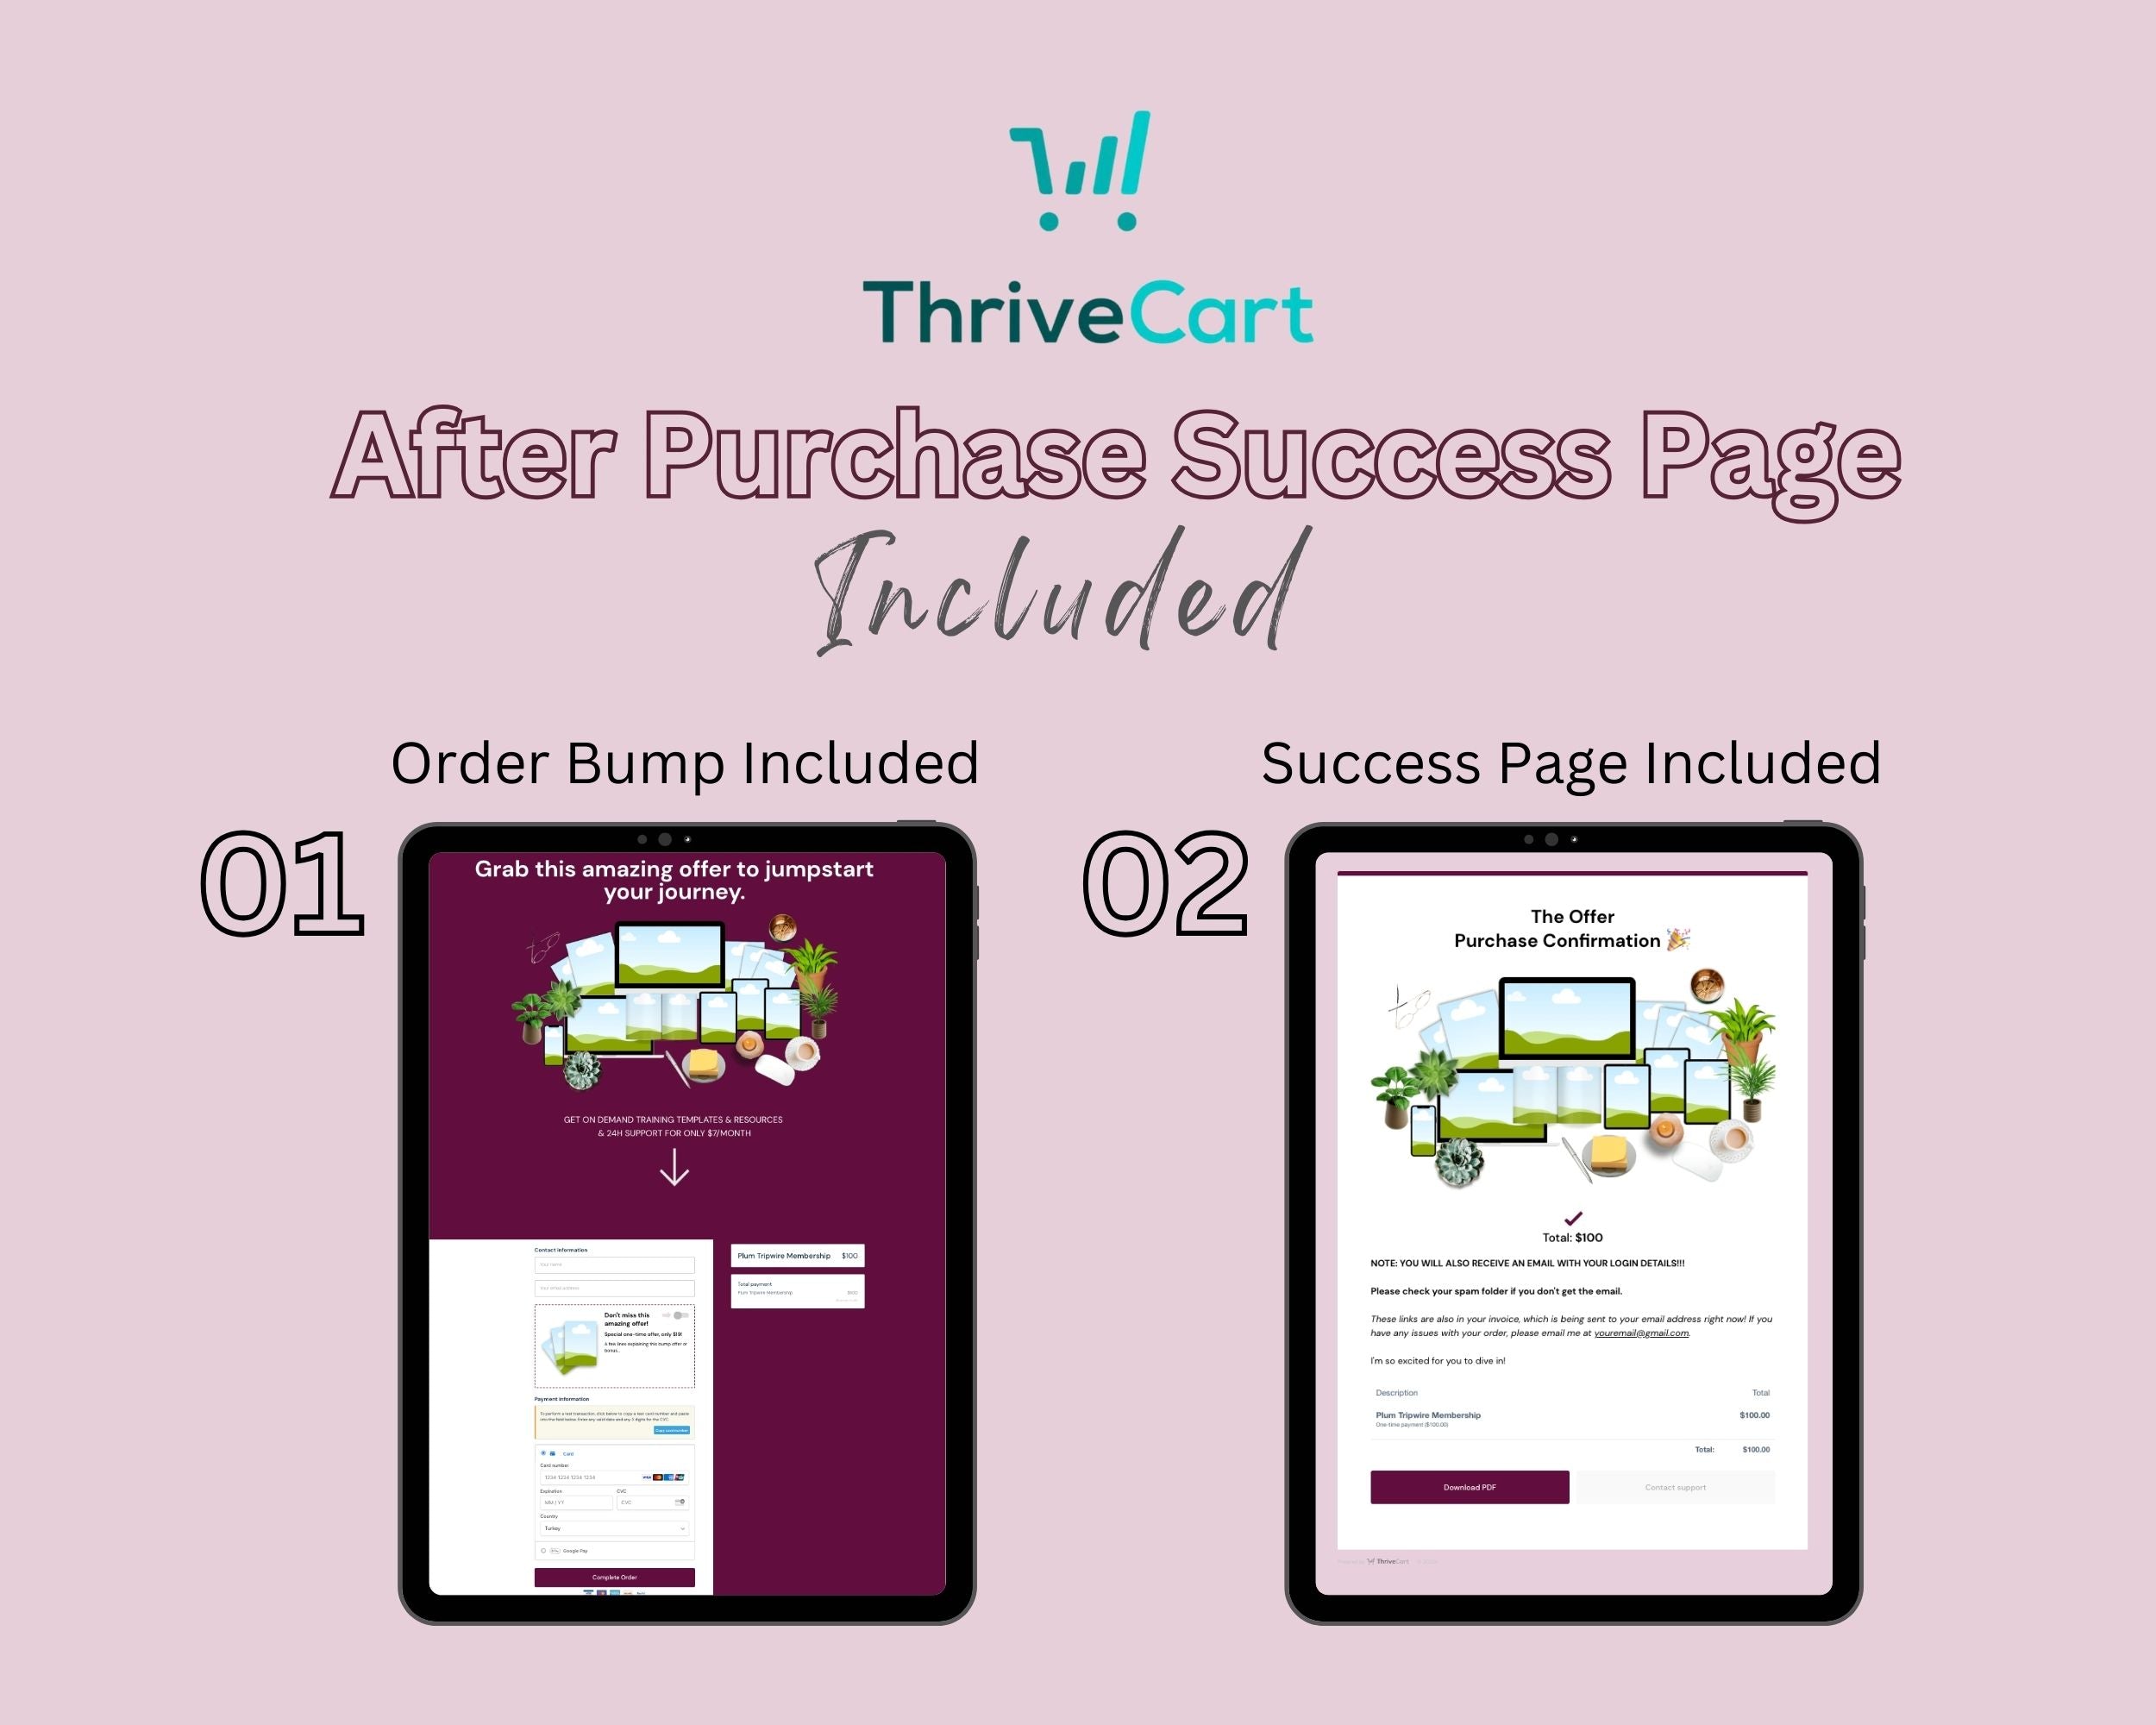 Tripwire Membership Sales Page Template in ThriveCart